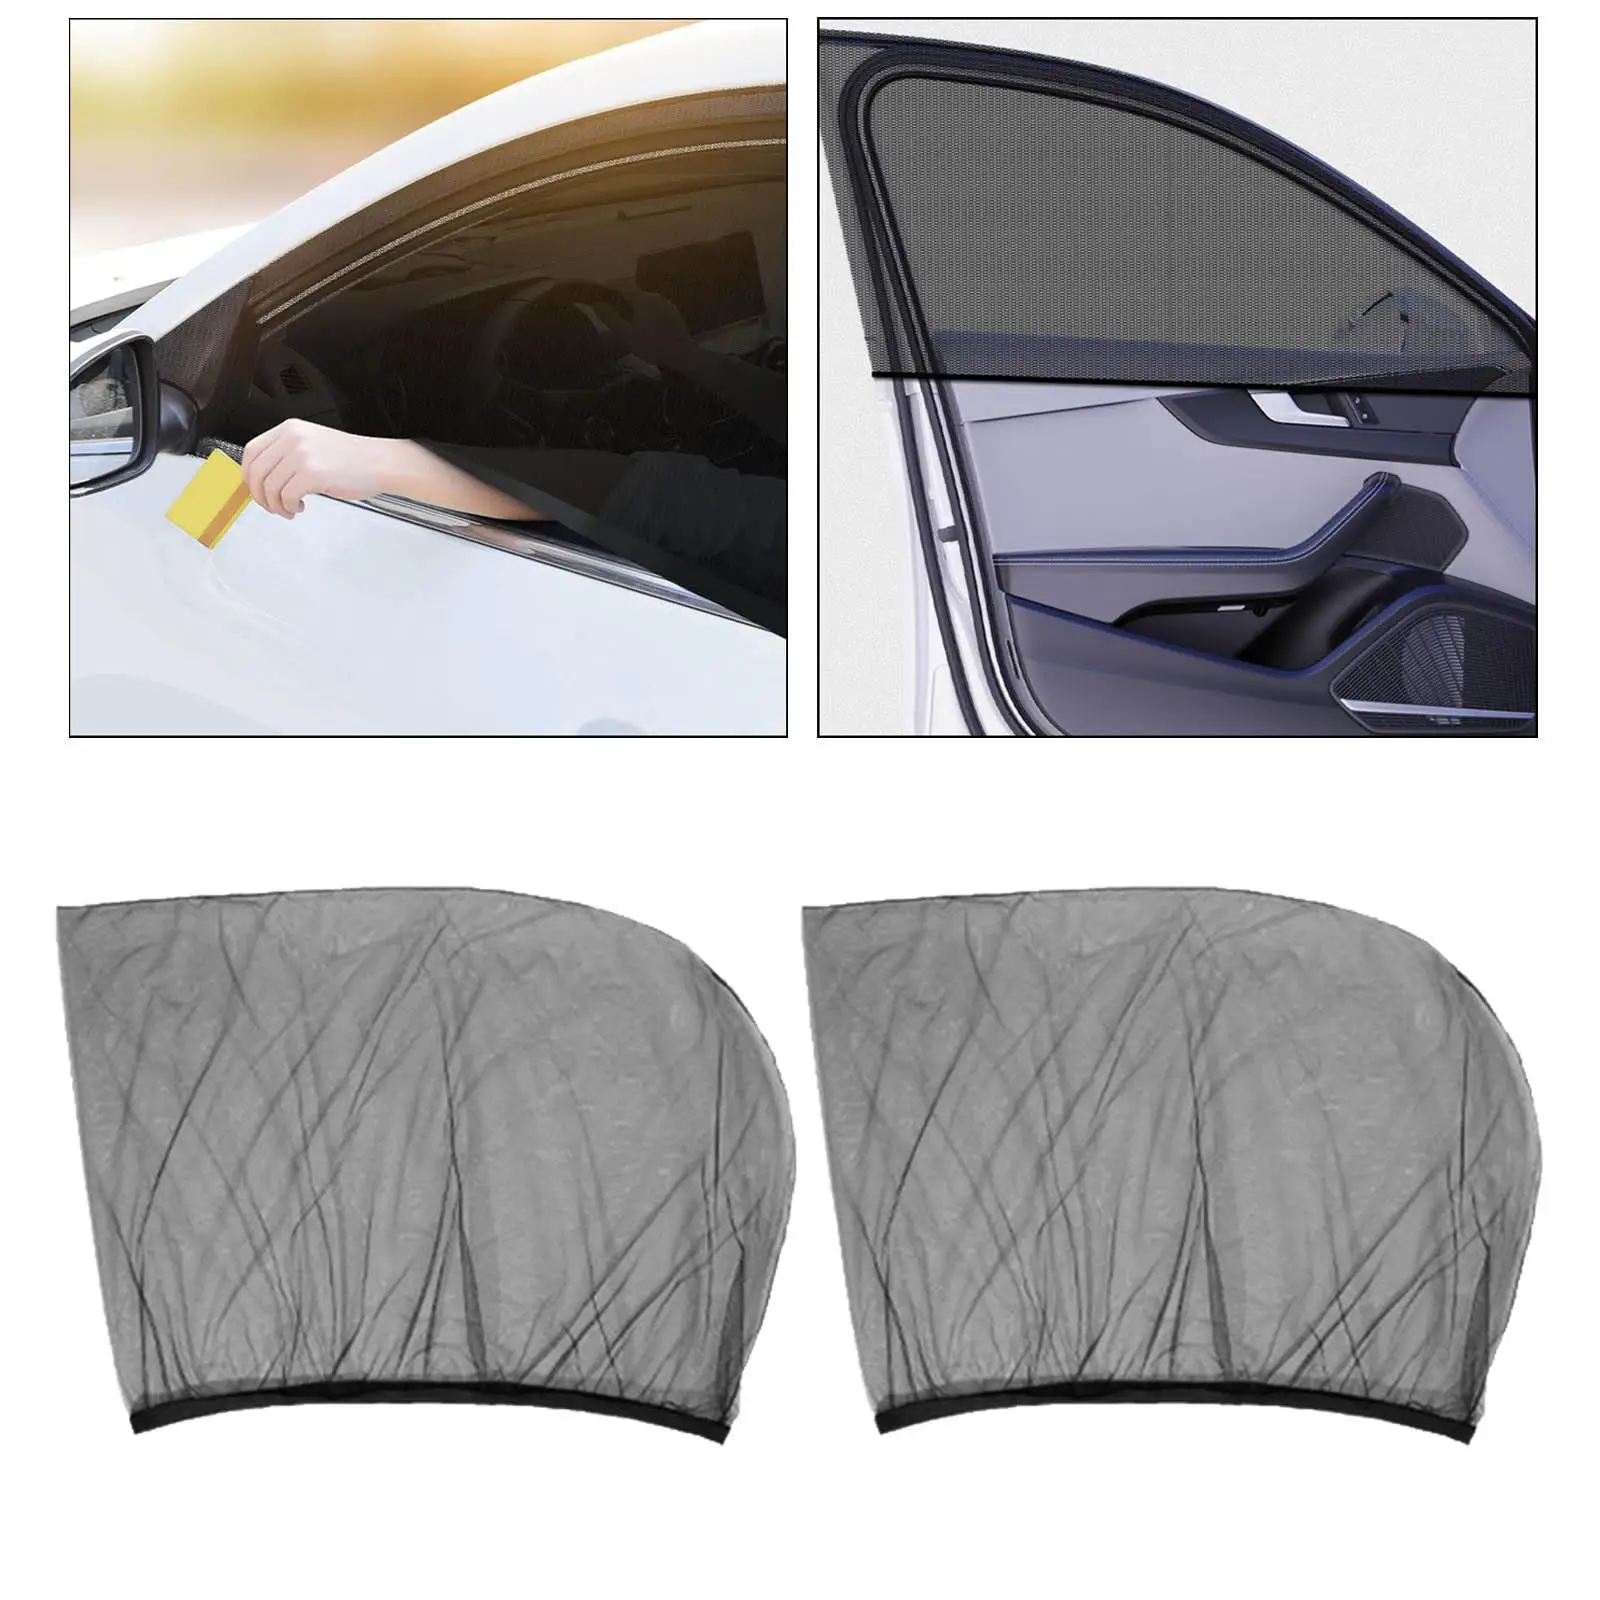 2 Pieces Car Window Privacy Curtain Insect Proof Sun Blocker Sun Shade UV Protector Car Curtains Fit for Children Family Baby